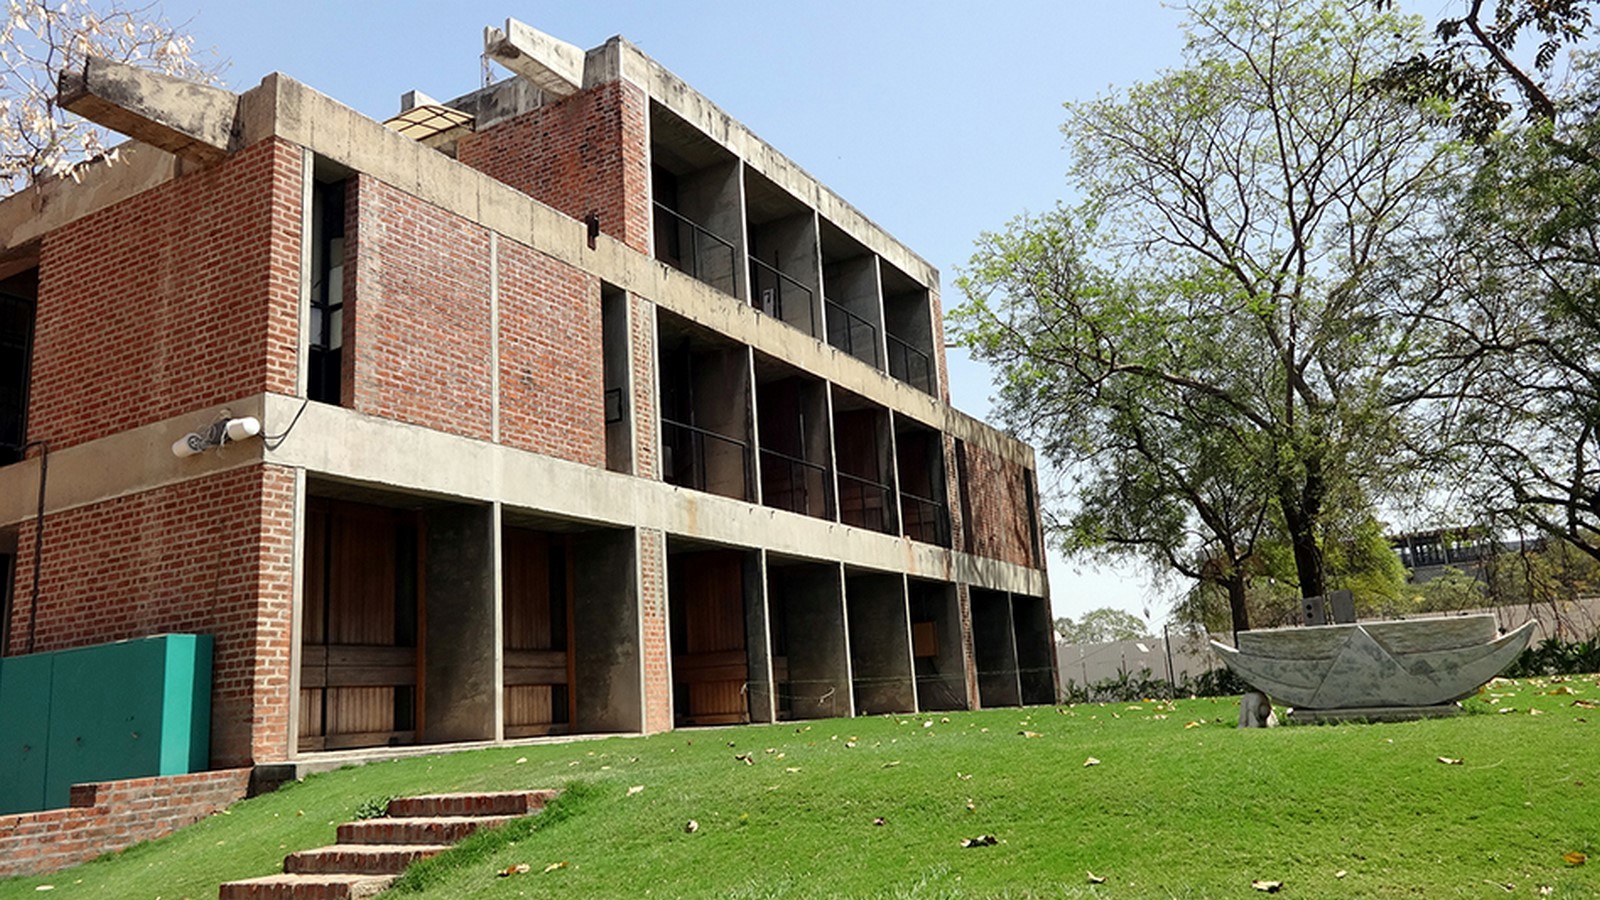 Center for Environmental Planning and Technology University (CEPT), Ahmedabad - Sheet1